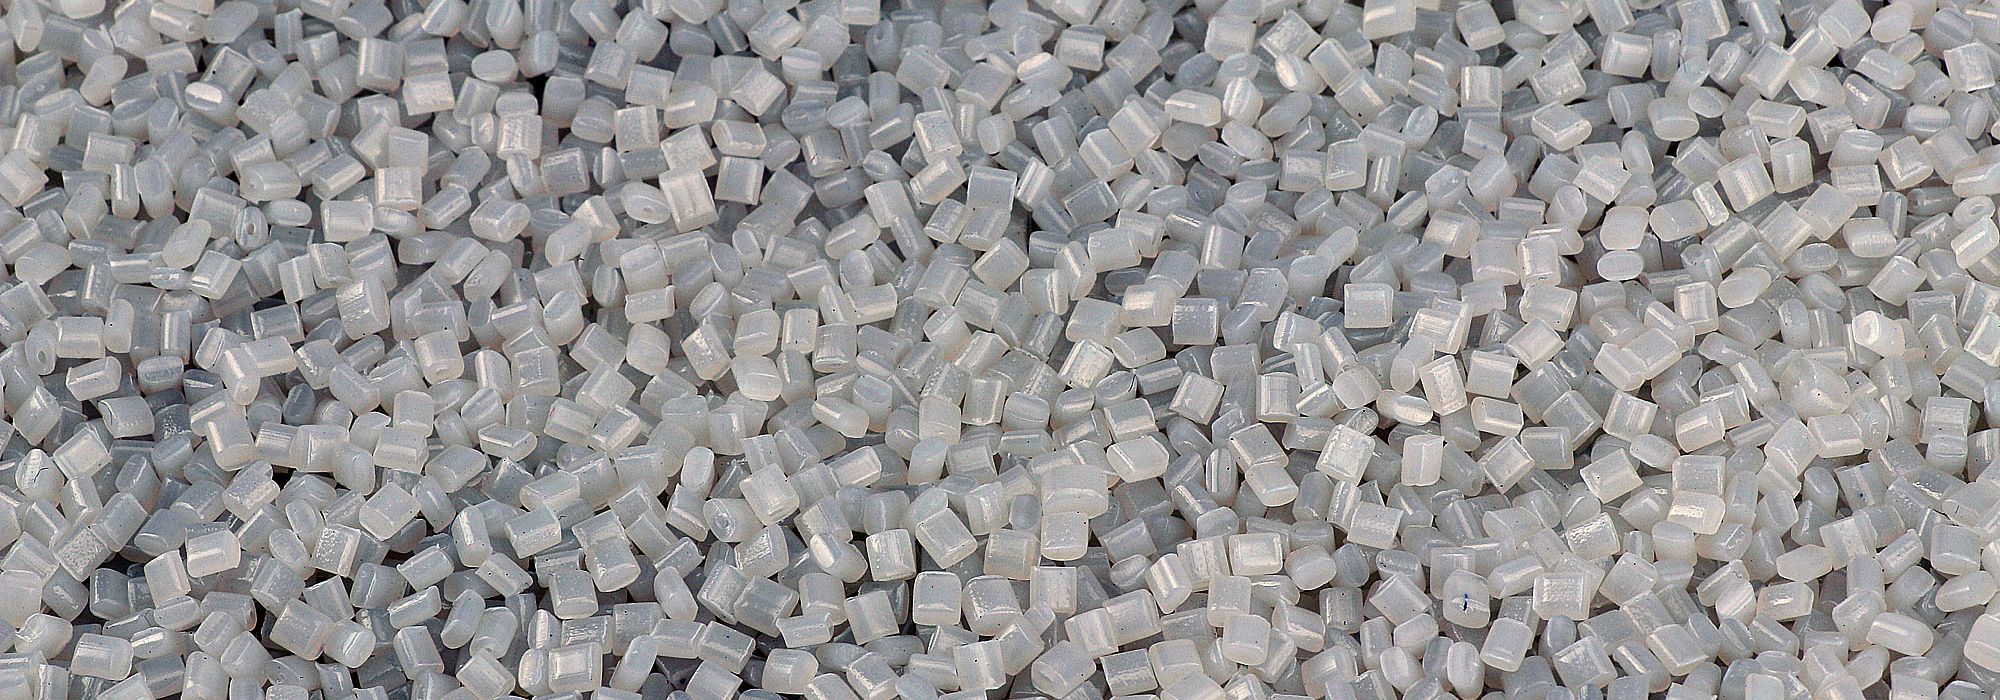 Plastic Recyclate Pellets - Post Consumer Recycling r-HDPE - High-Density Polyethylen